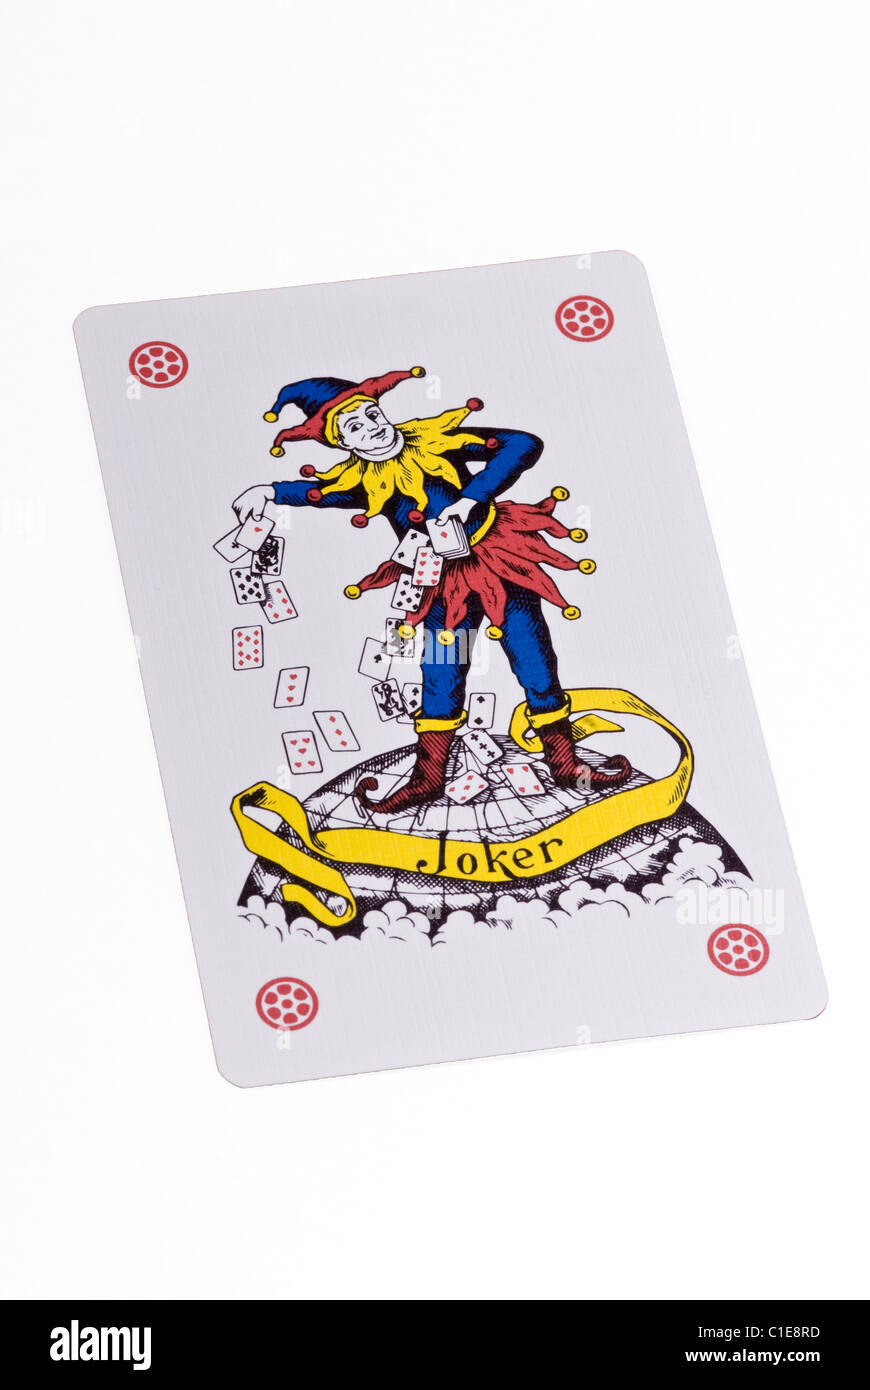 Joker playing card on a white background. Stock Photo